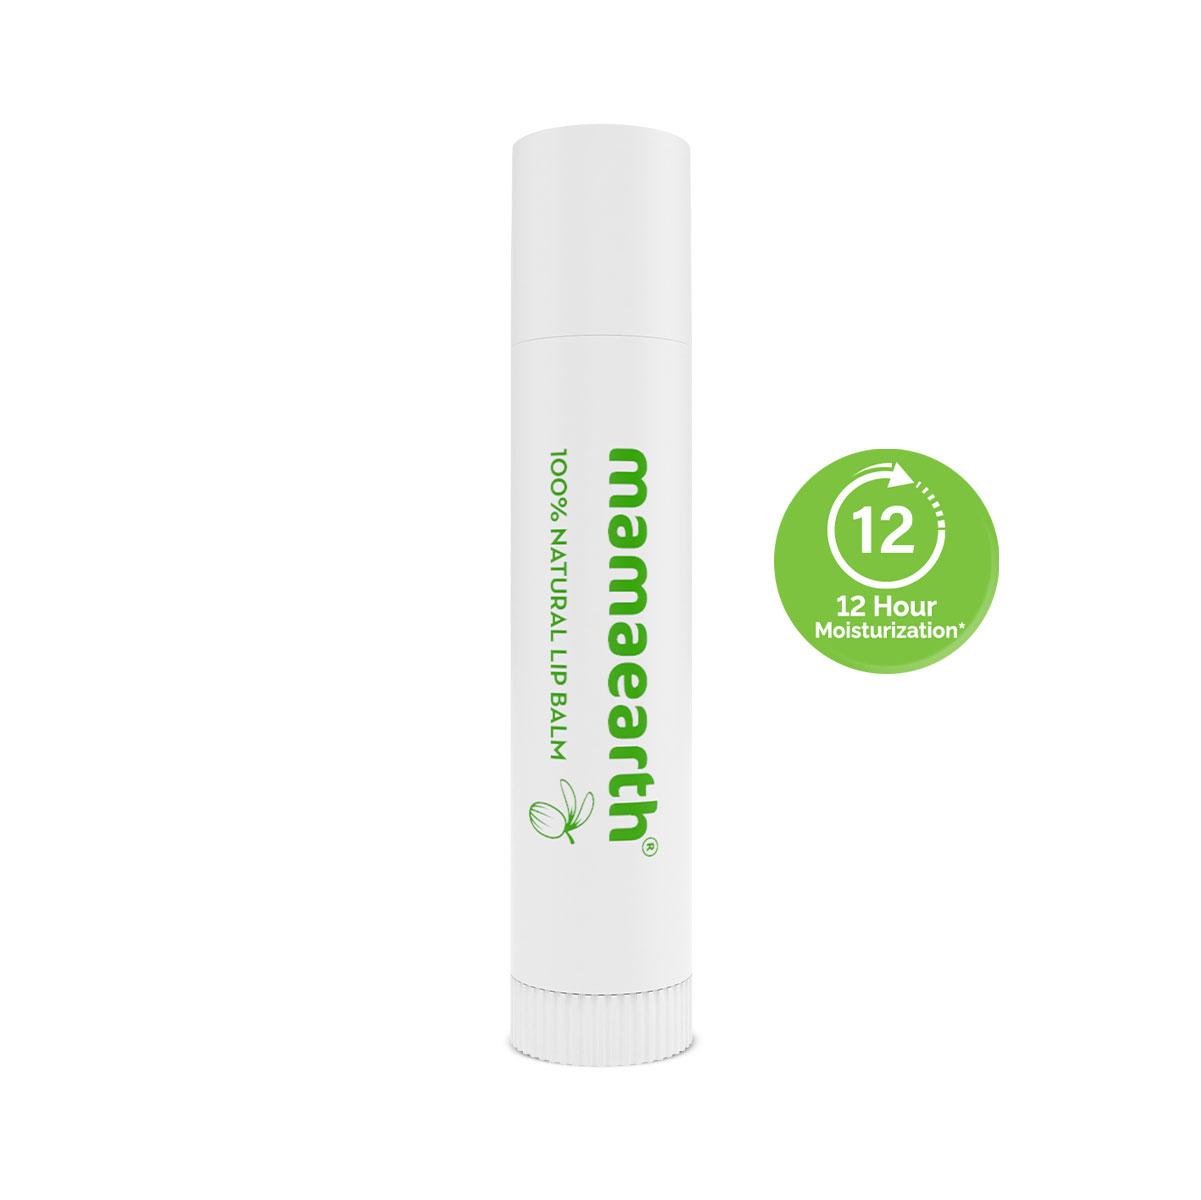 nourishing 100% natural lip balm with vitamin e and shea butter for soft & supple lips - 4 g